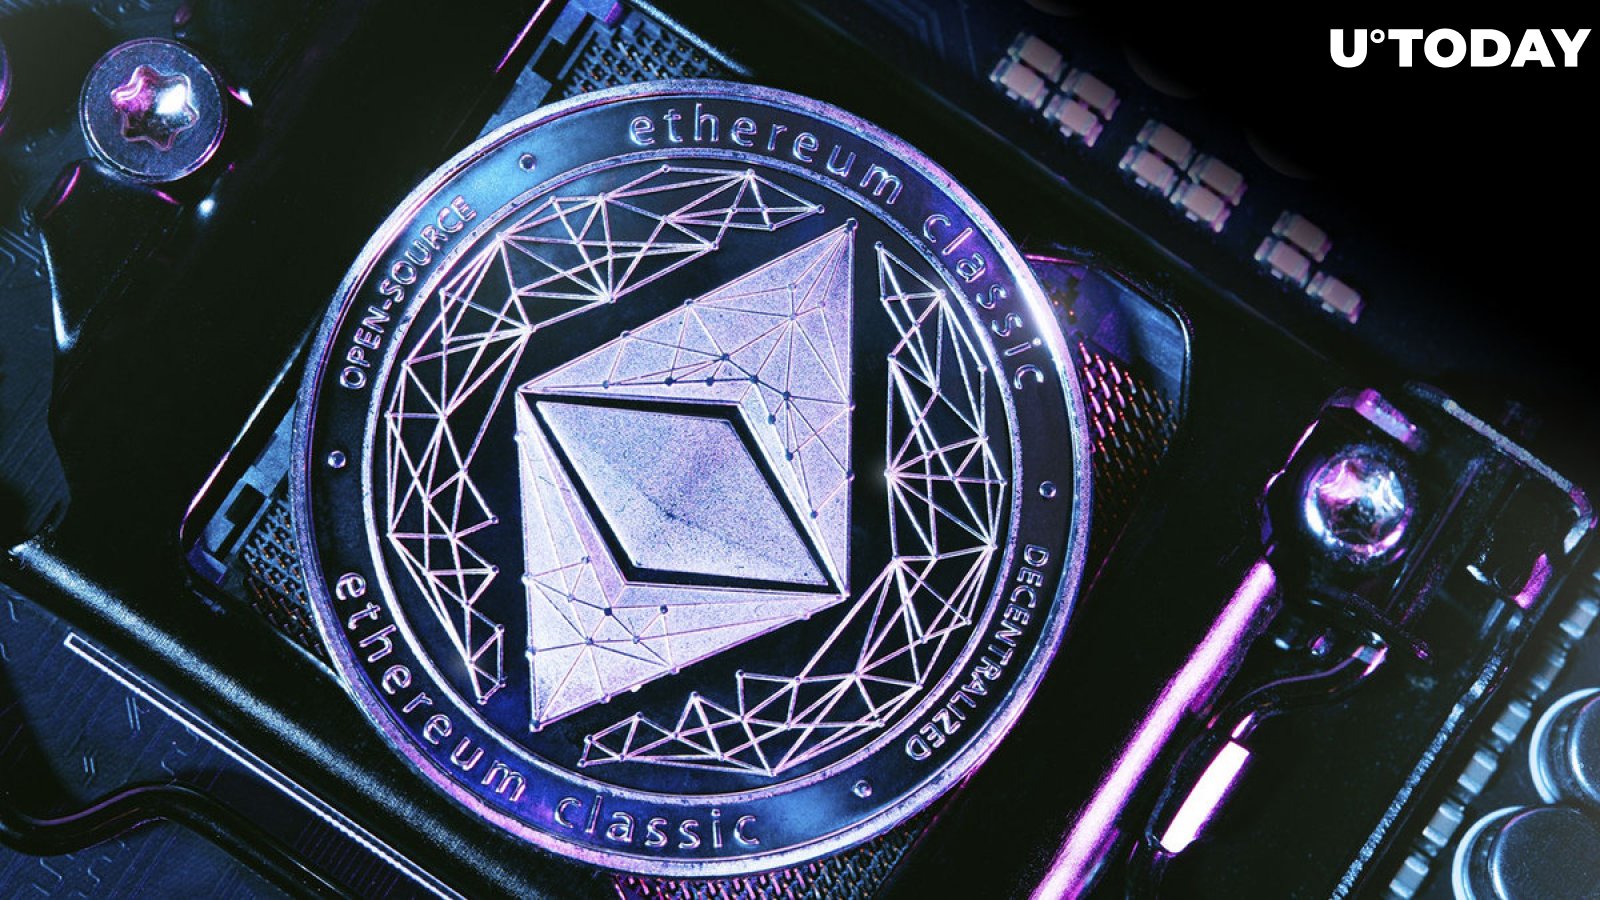 This Ethereum Update Is Critical for Future, Vitalik Buterin Explains